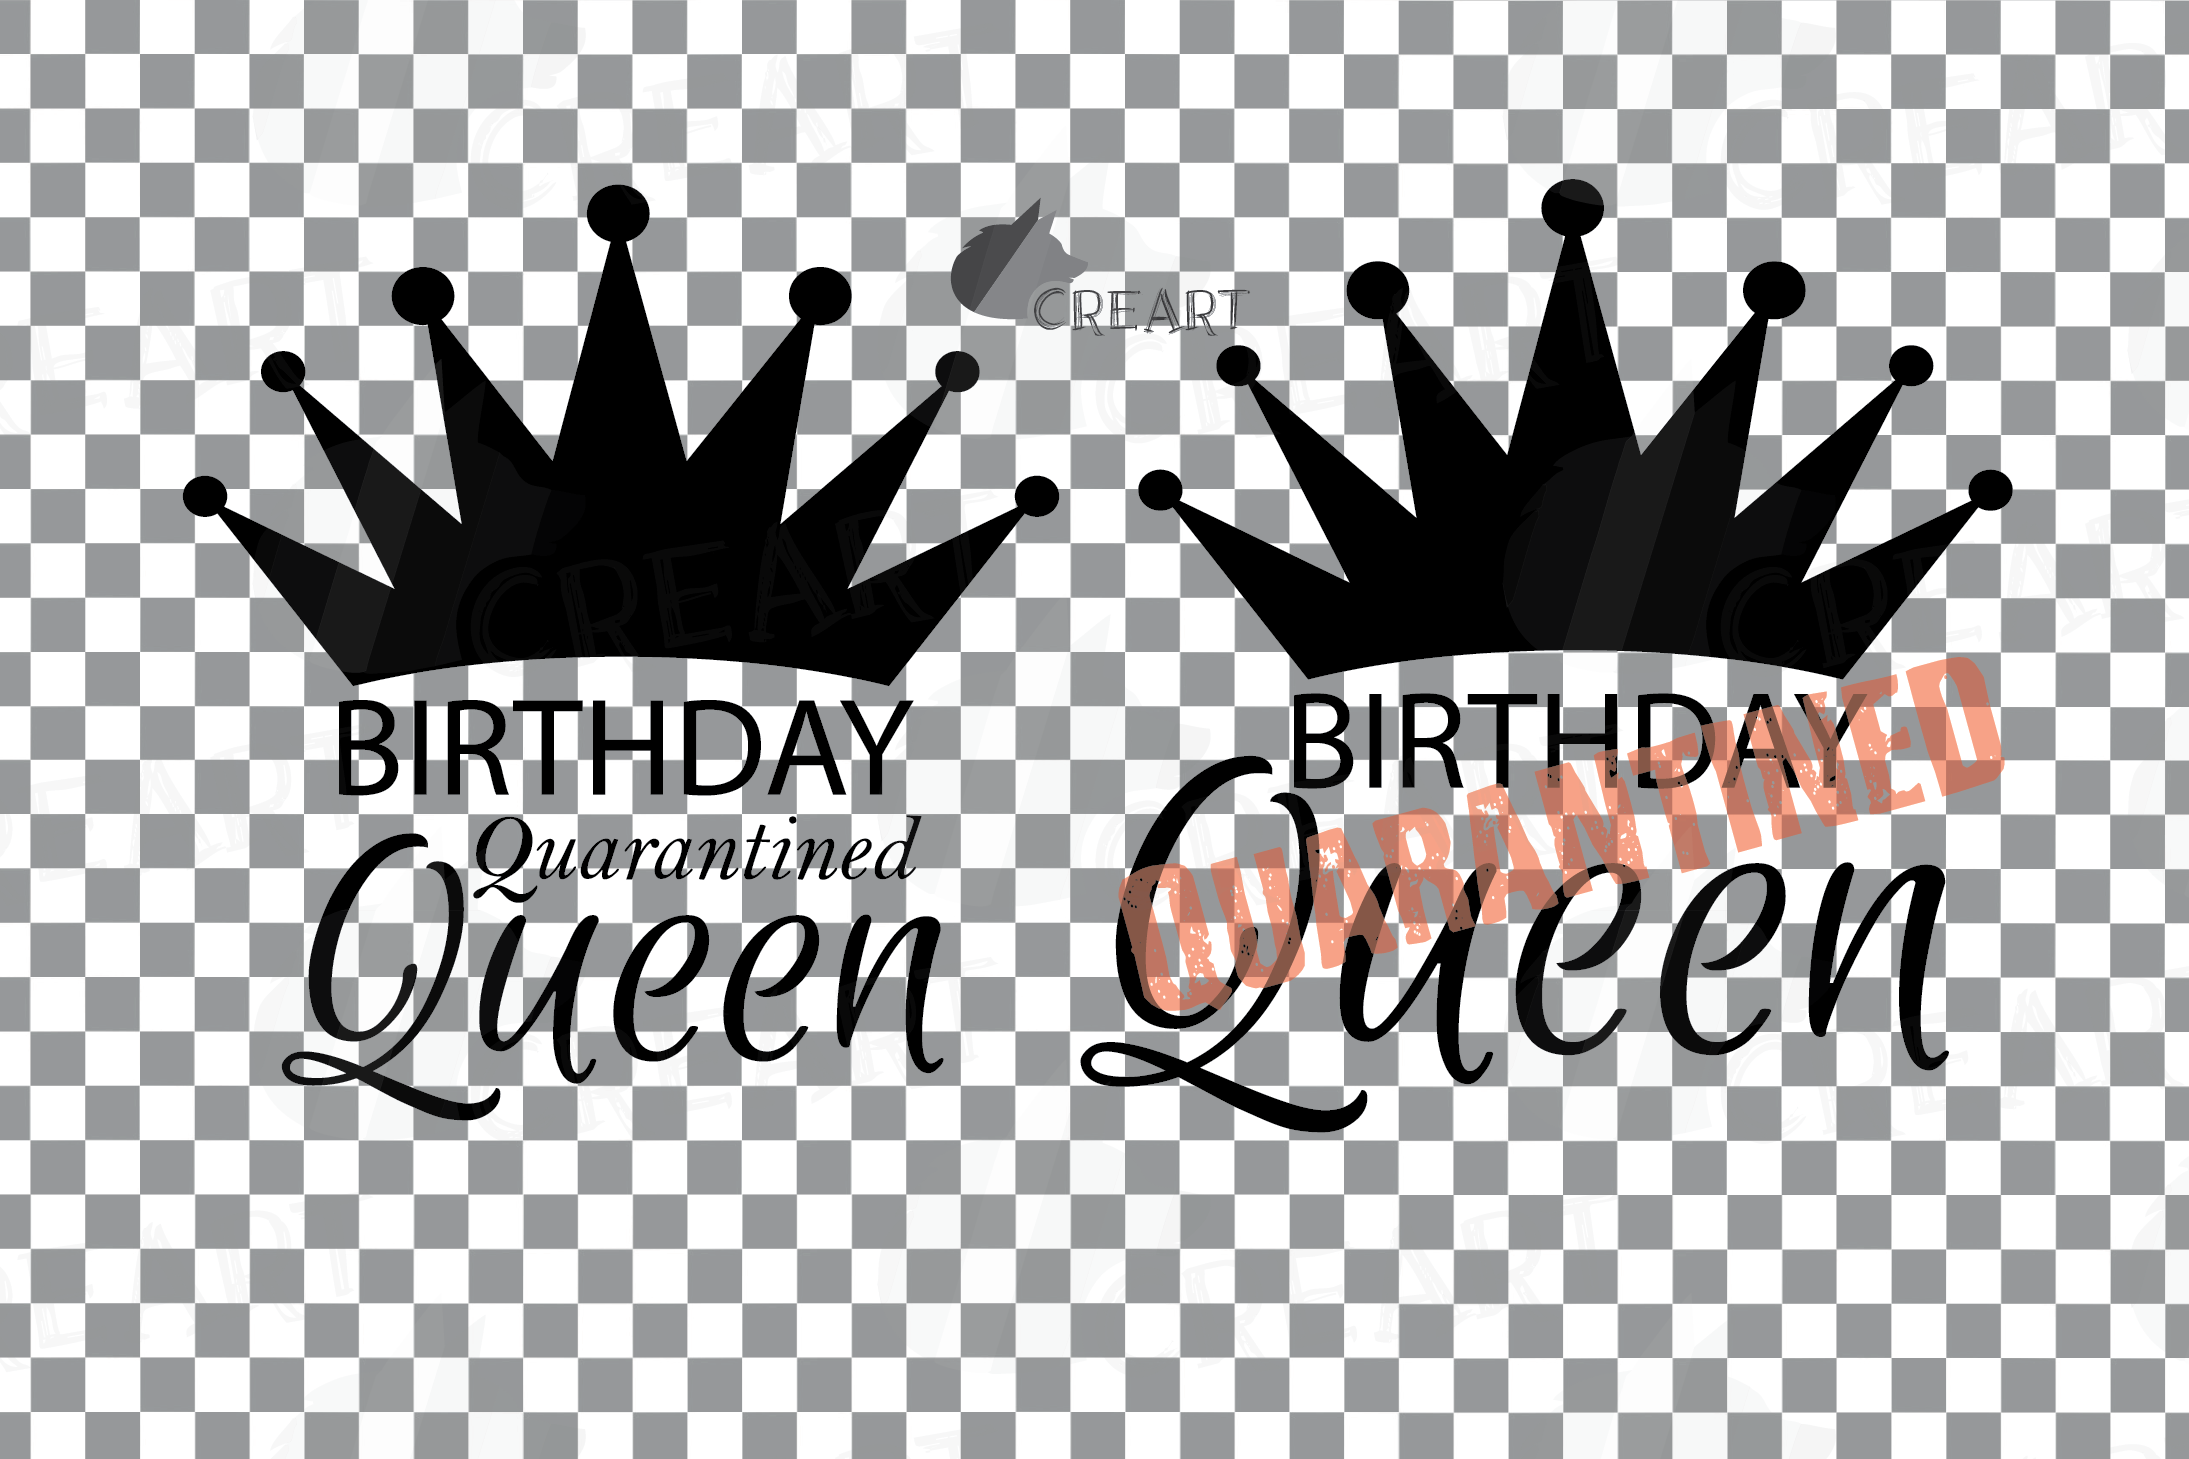 Download Quarantined Birthday Queen gift and decor svg cutting file.